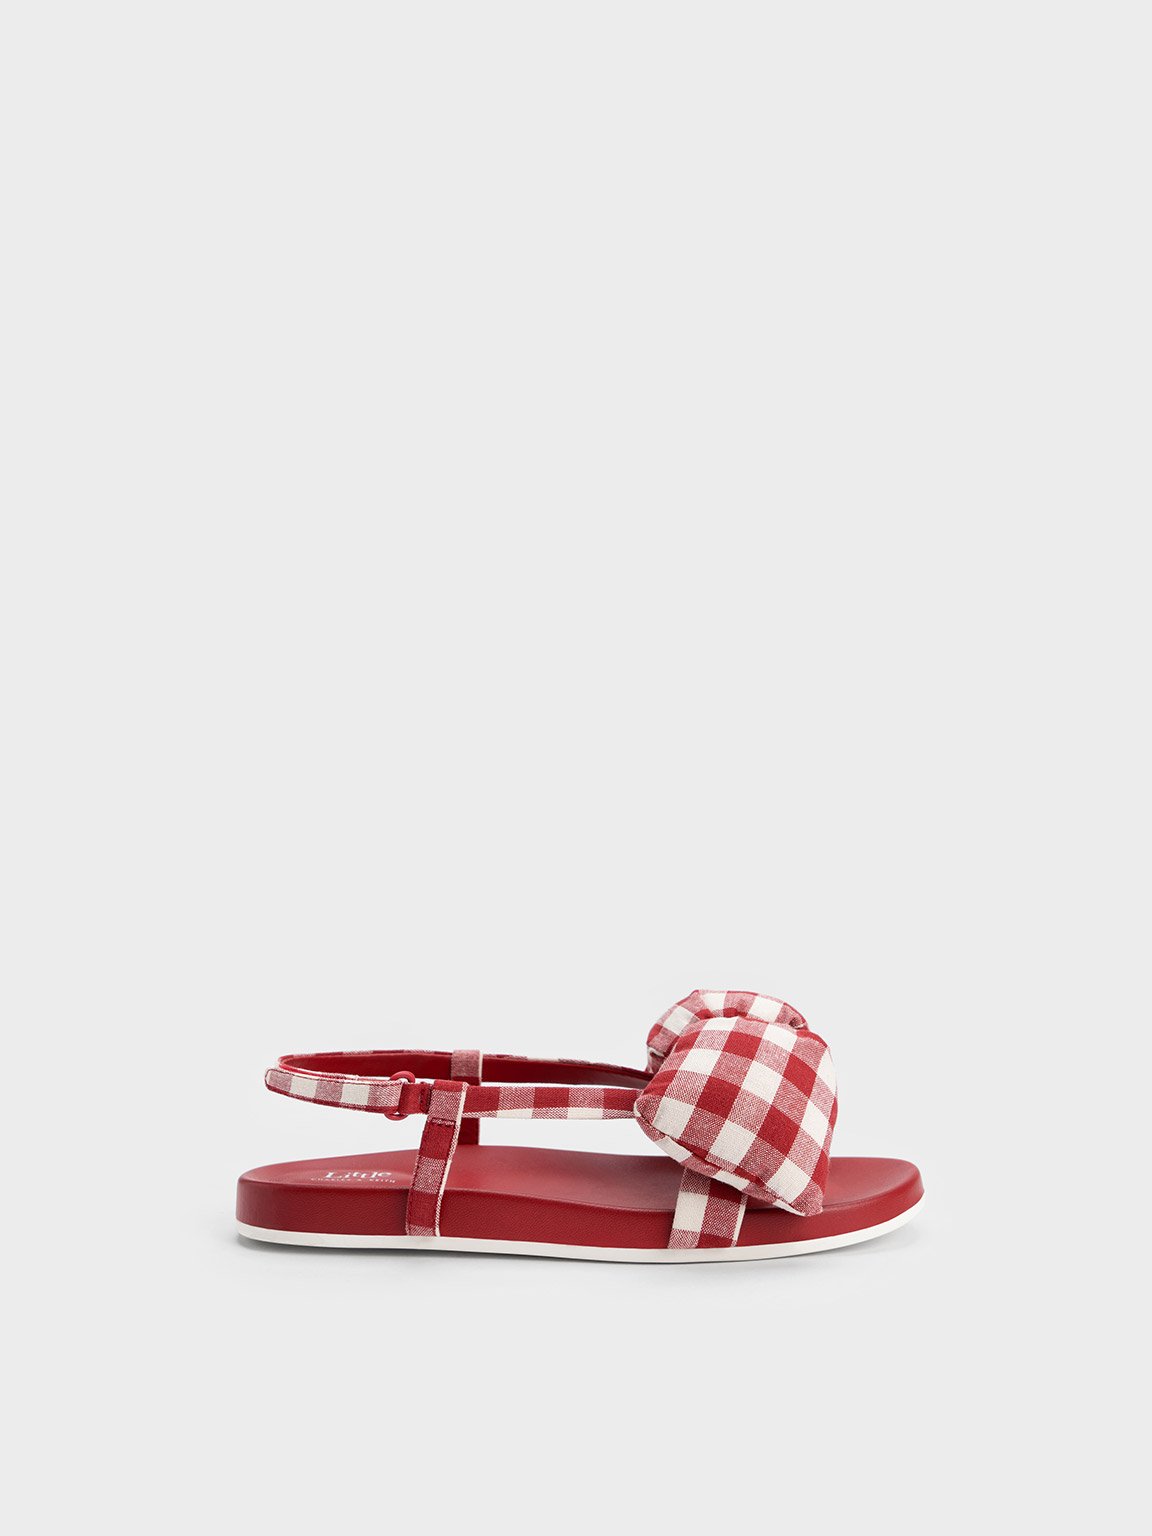 Girls’ Checkered Puffy Bow Sandals